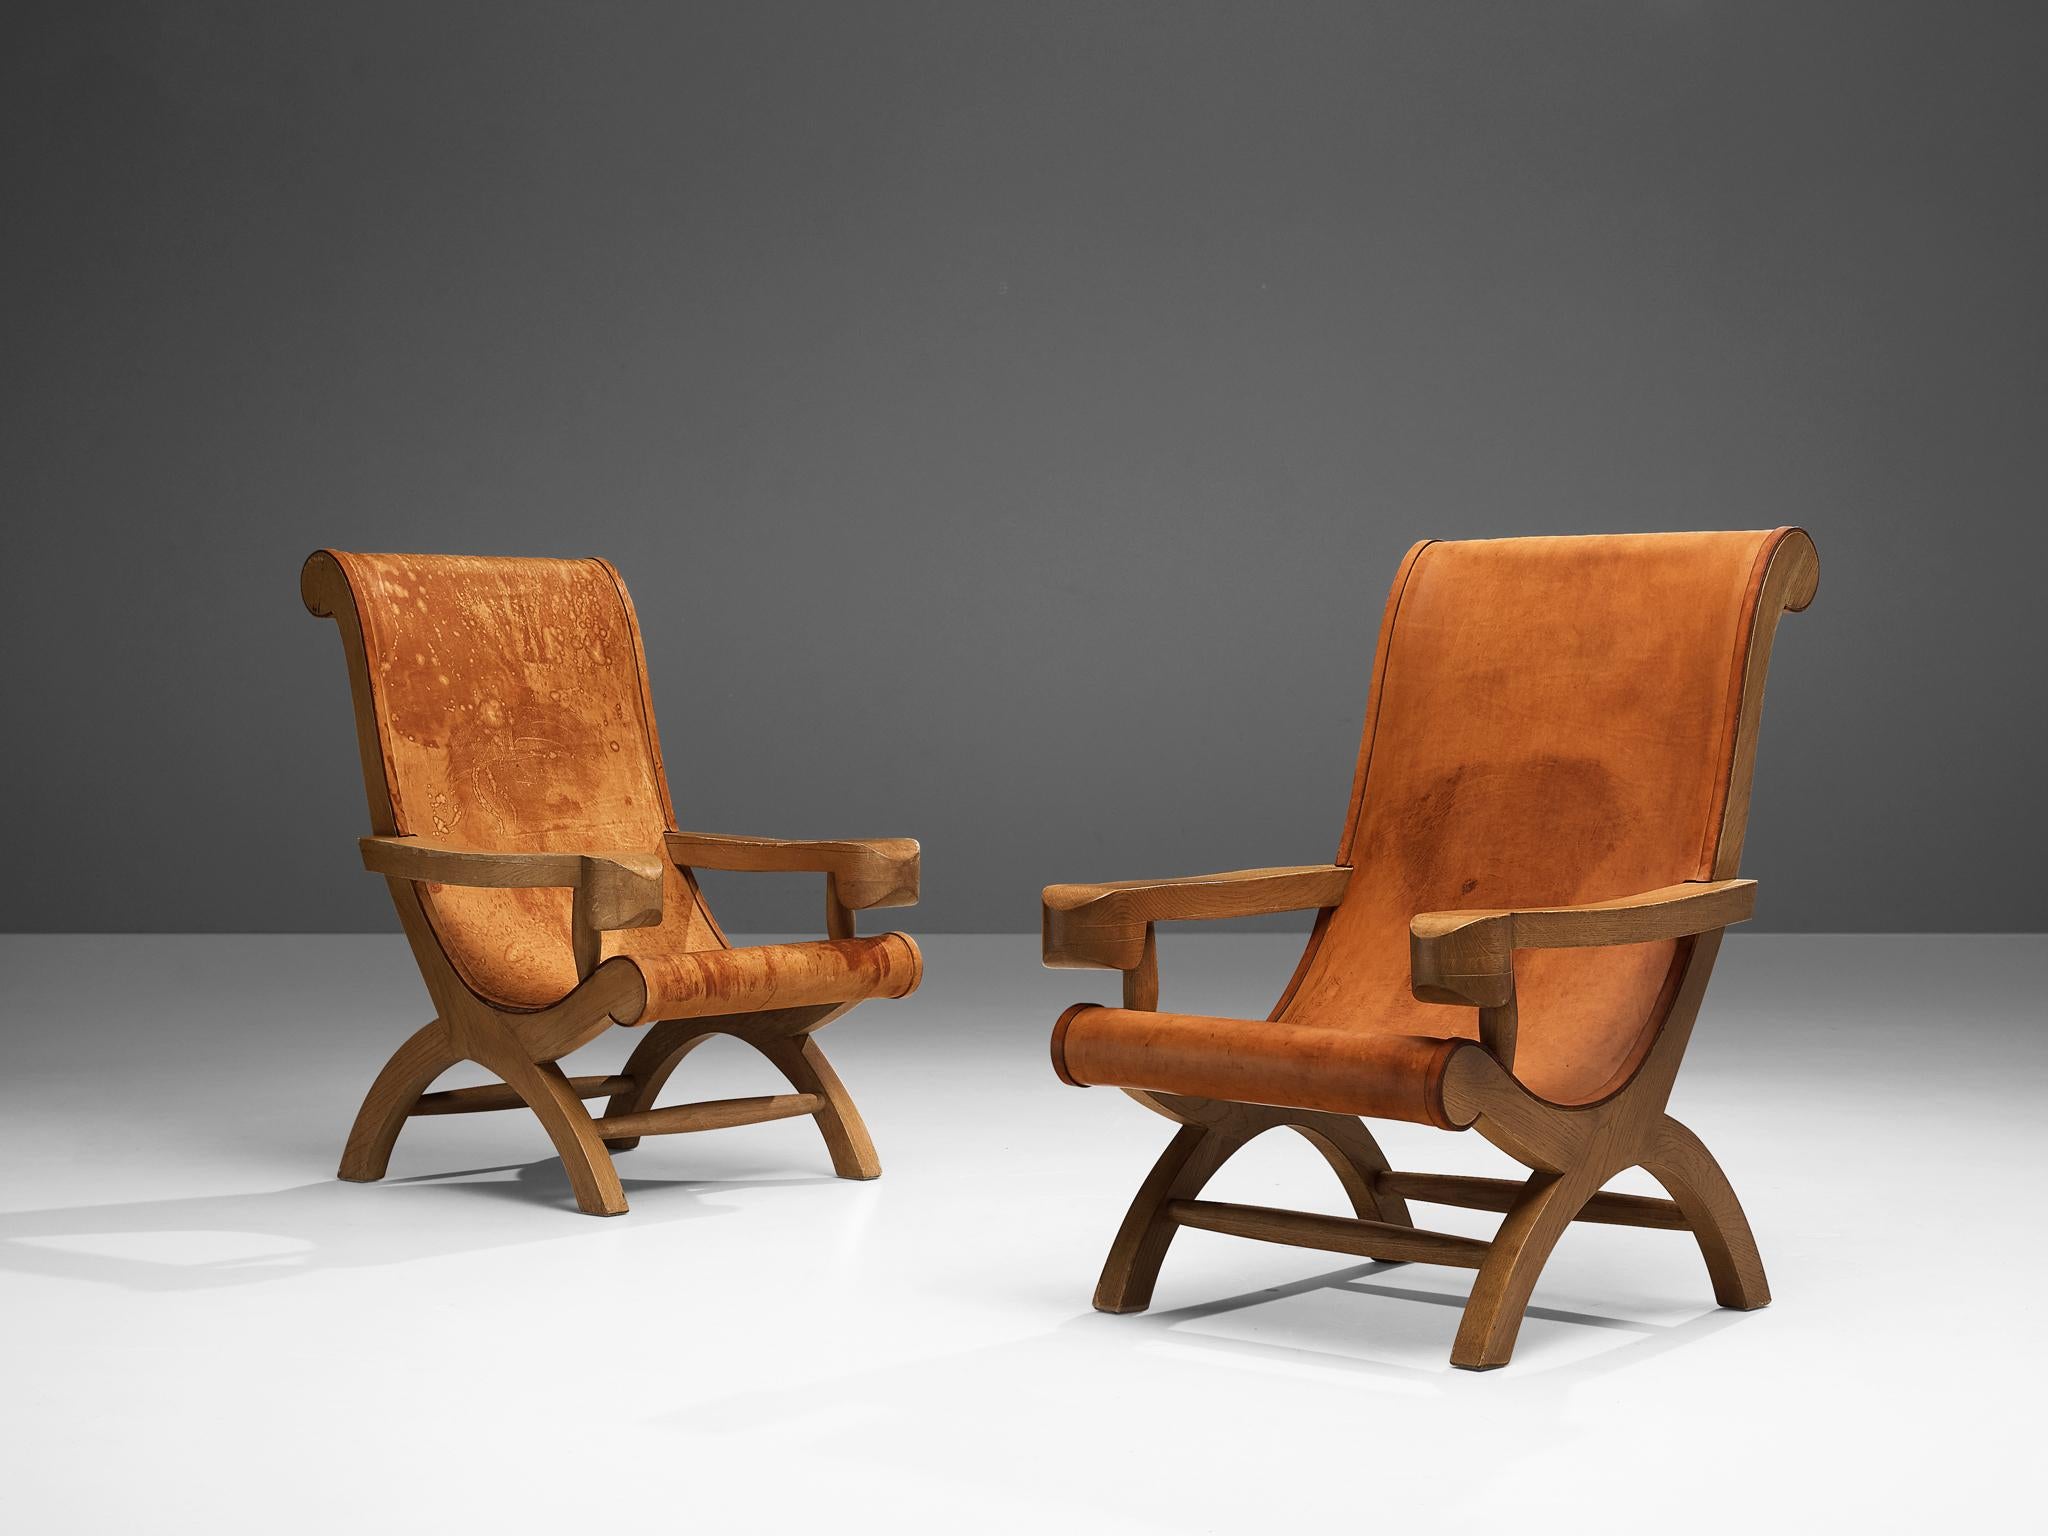 Attributed to Clara Porset, armchairs 'Butaque', patinated leather, cypress wood, Mexico, circa 1947

Wonderful ‘Butaque’ armchair attributed to Clara Porset. It features a strong resemblance to Porset’s lounge chair ‘Butaque’ without armrests.